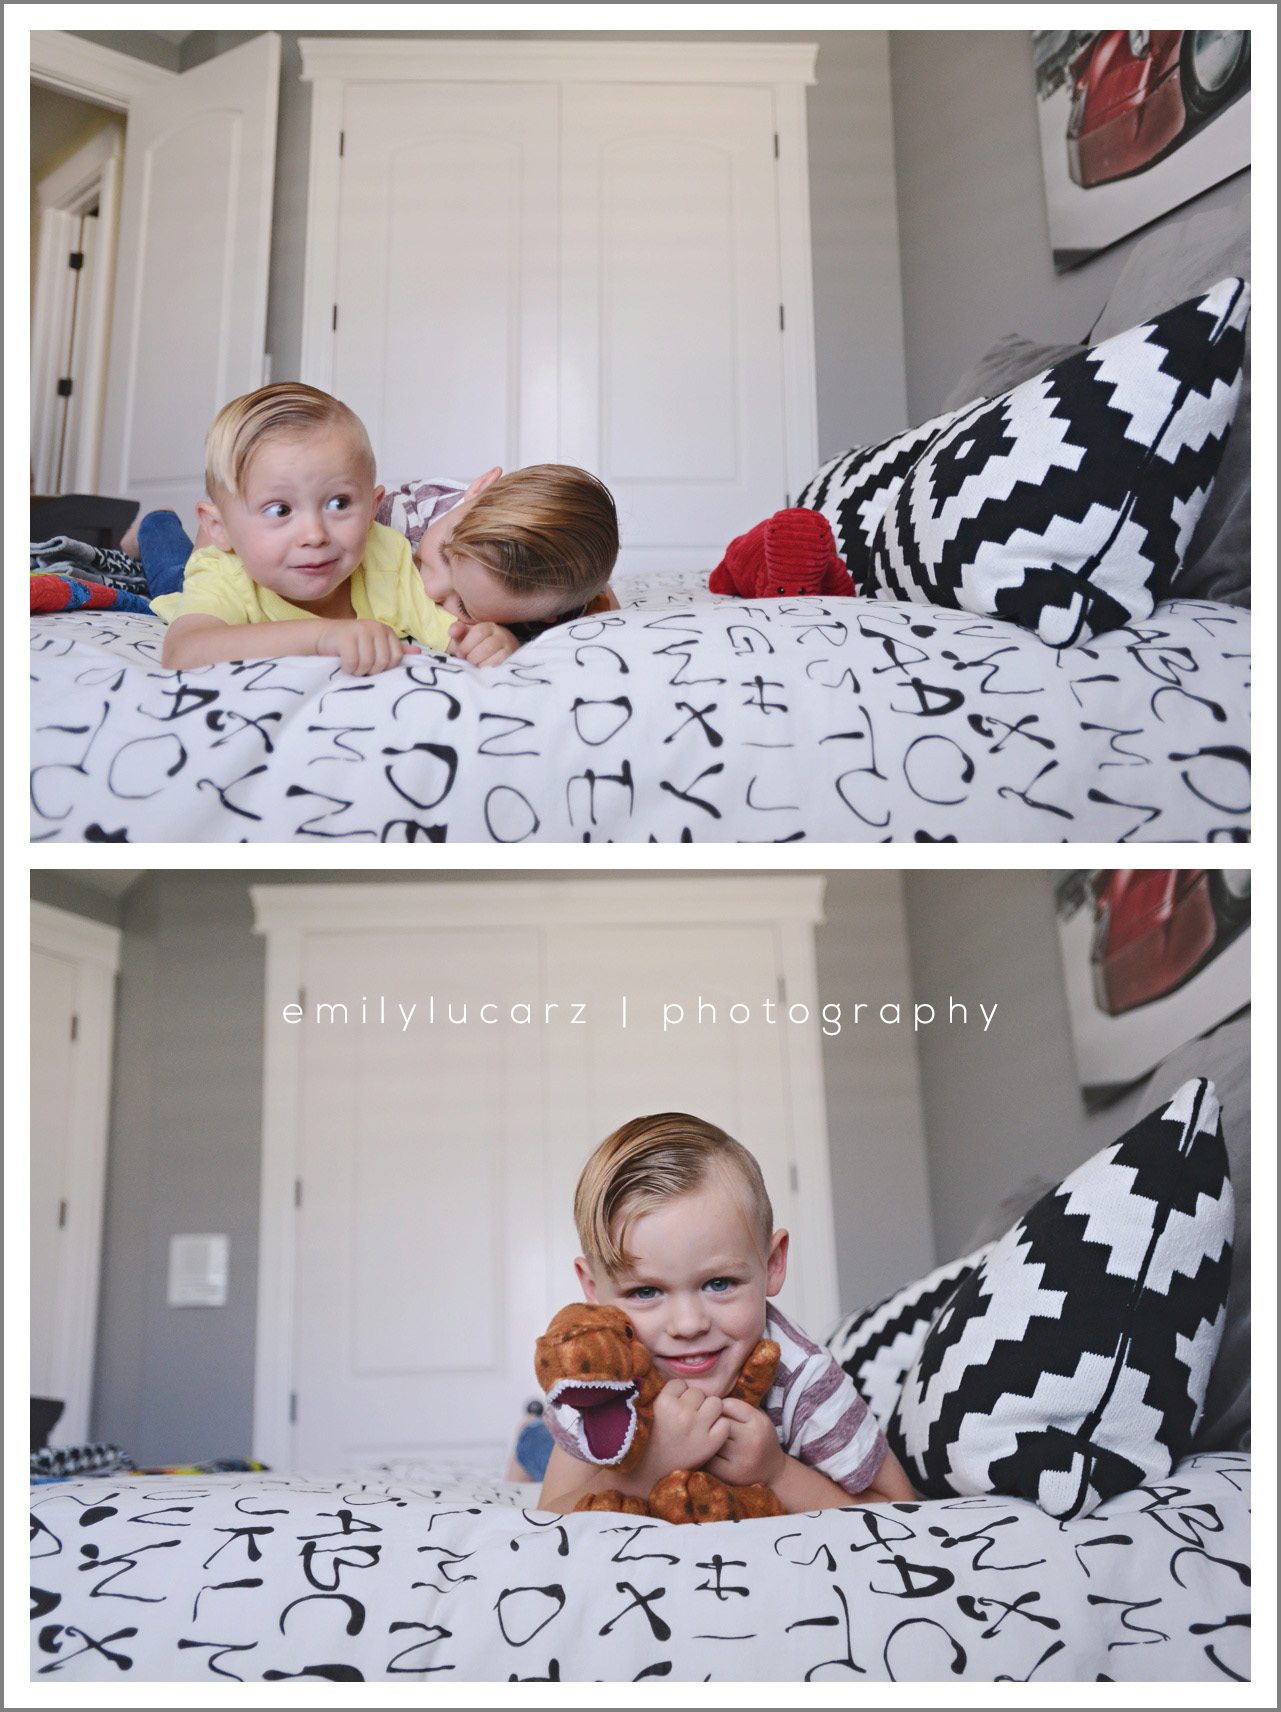 Lifestyle photography session ideas